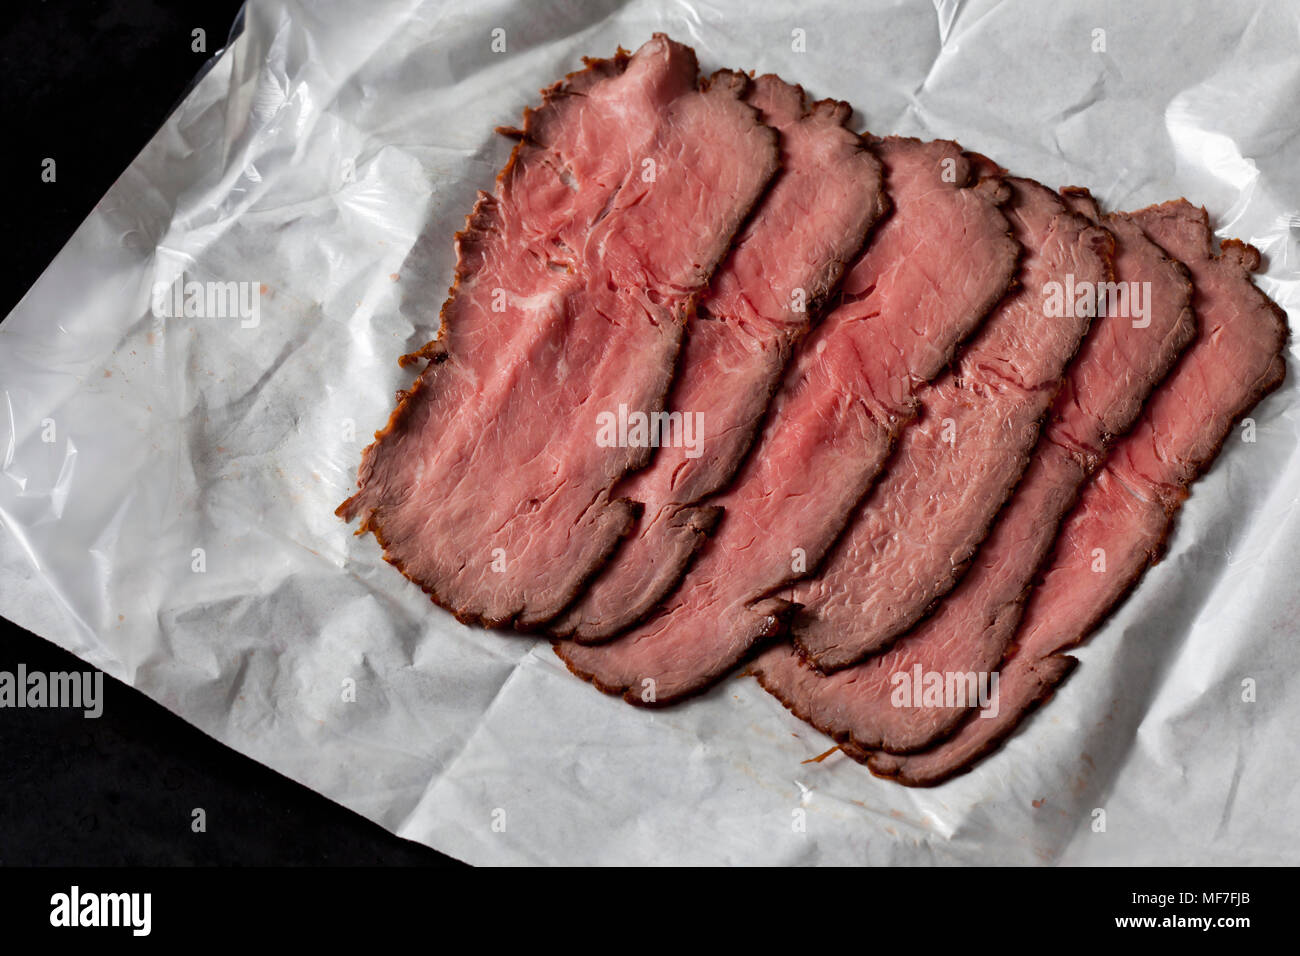 Six slices of roast beef on waxed paper Stock Photo